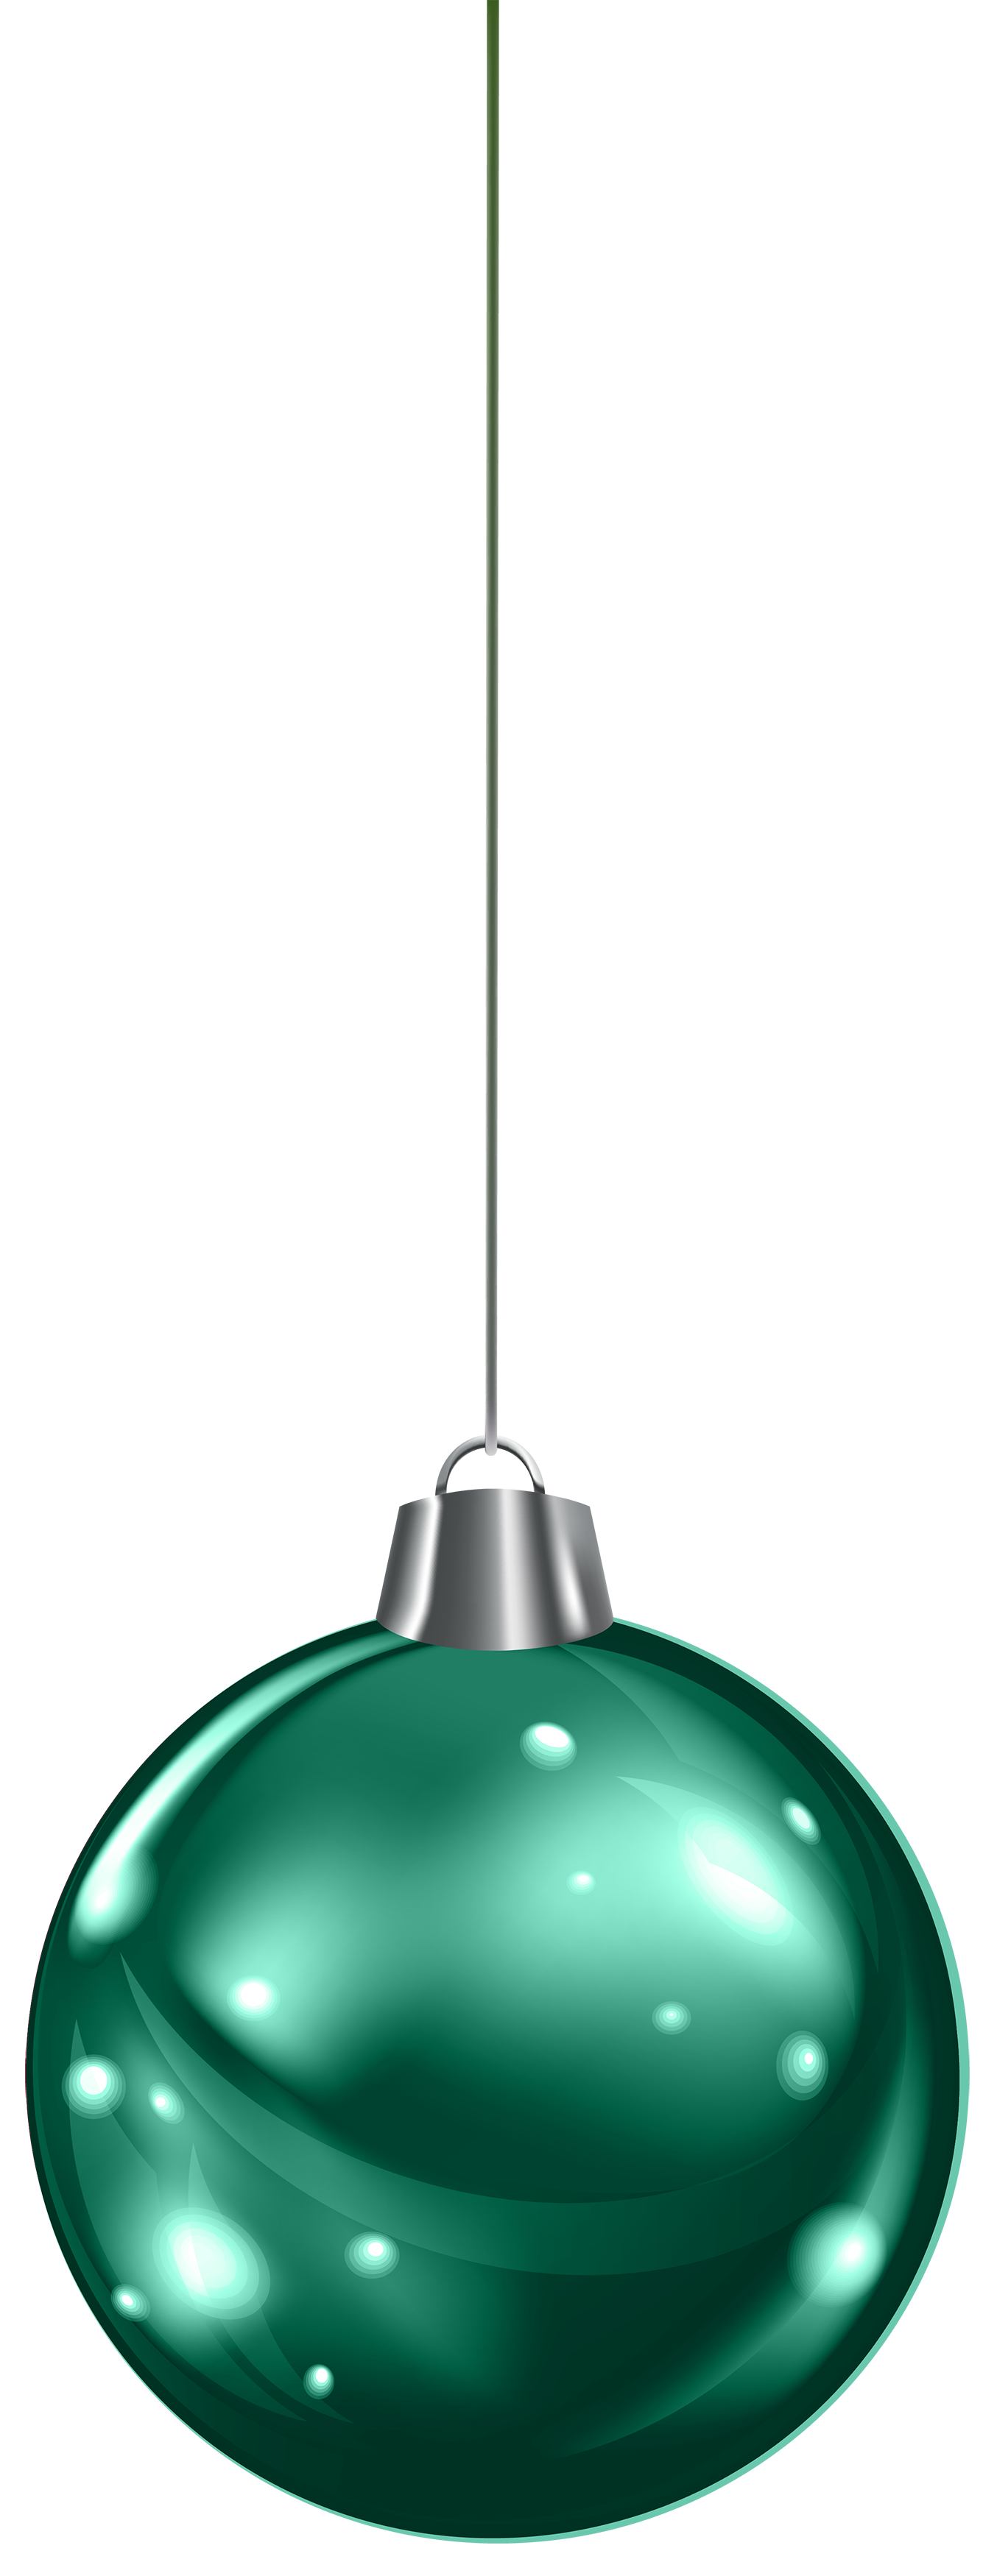 Hanging Green Christmas Ball PNG Clipart.